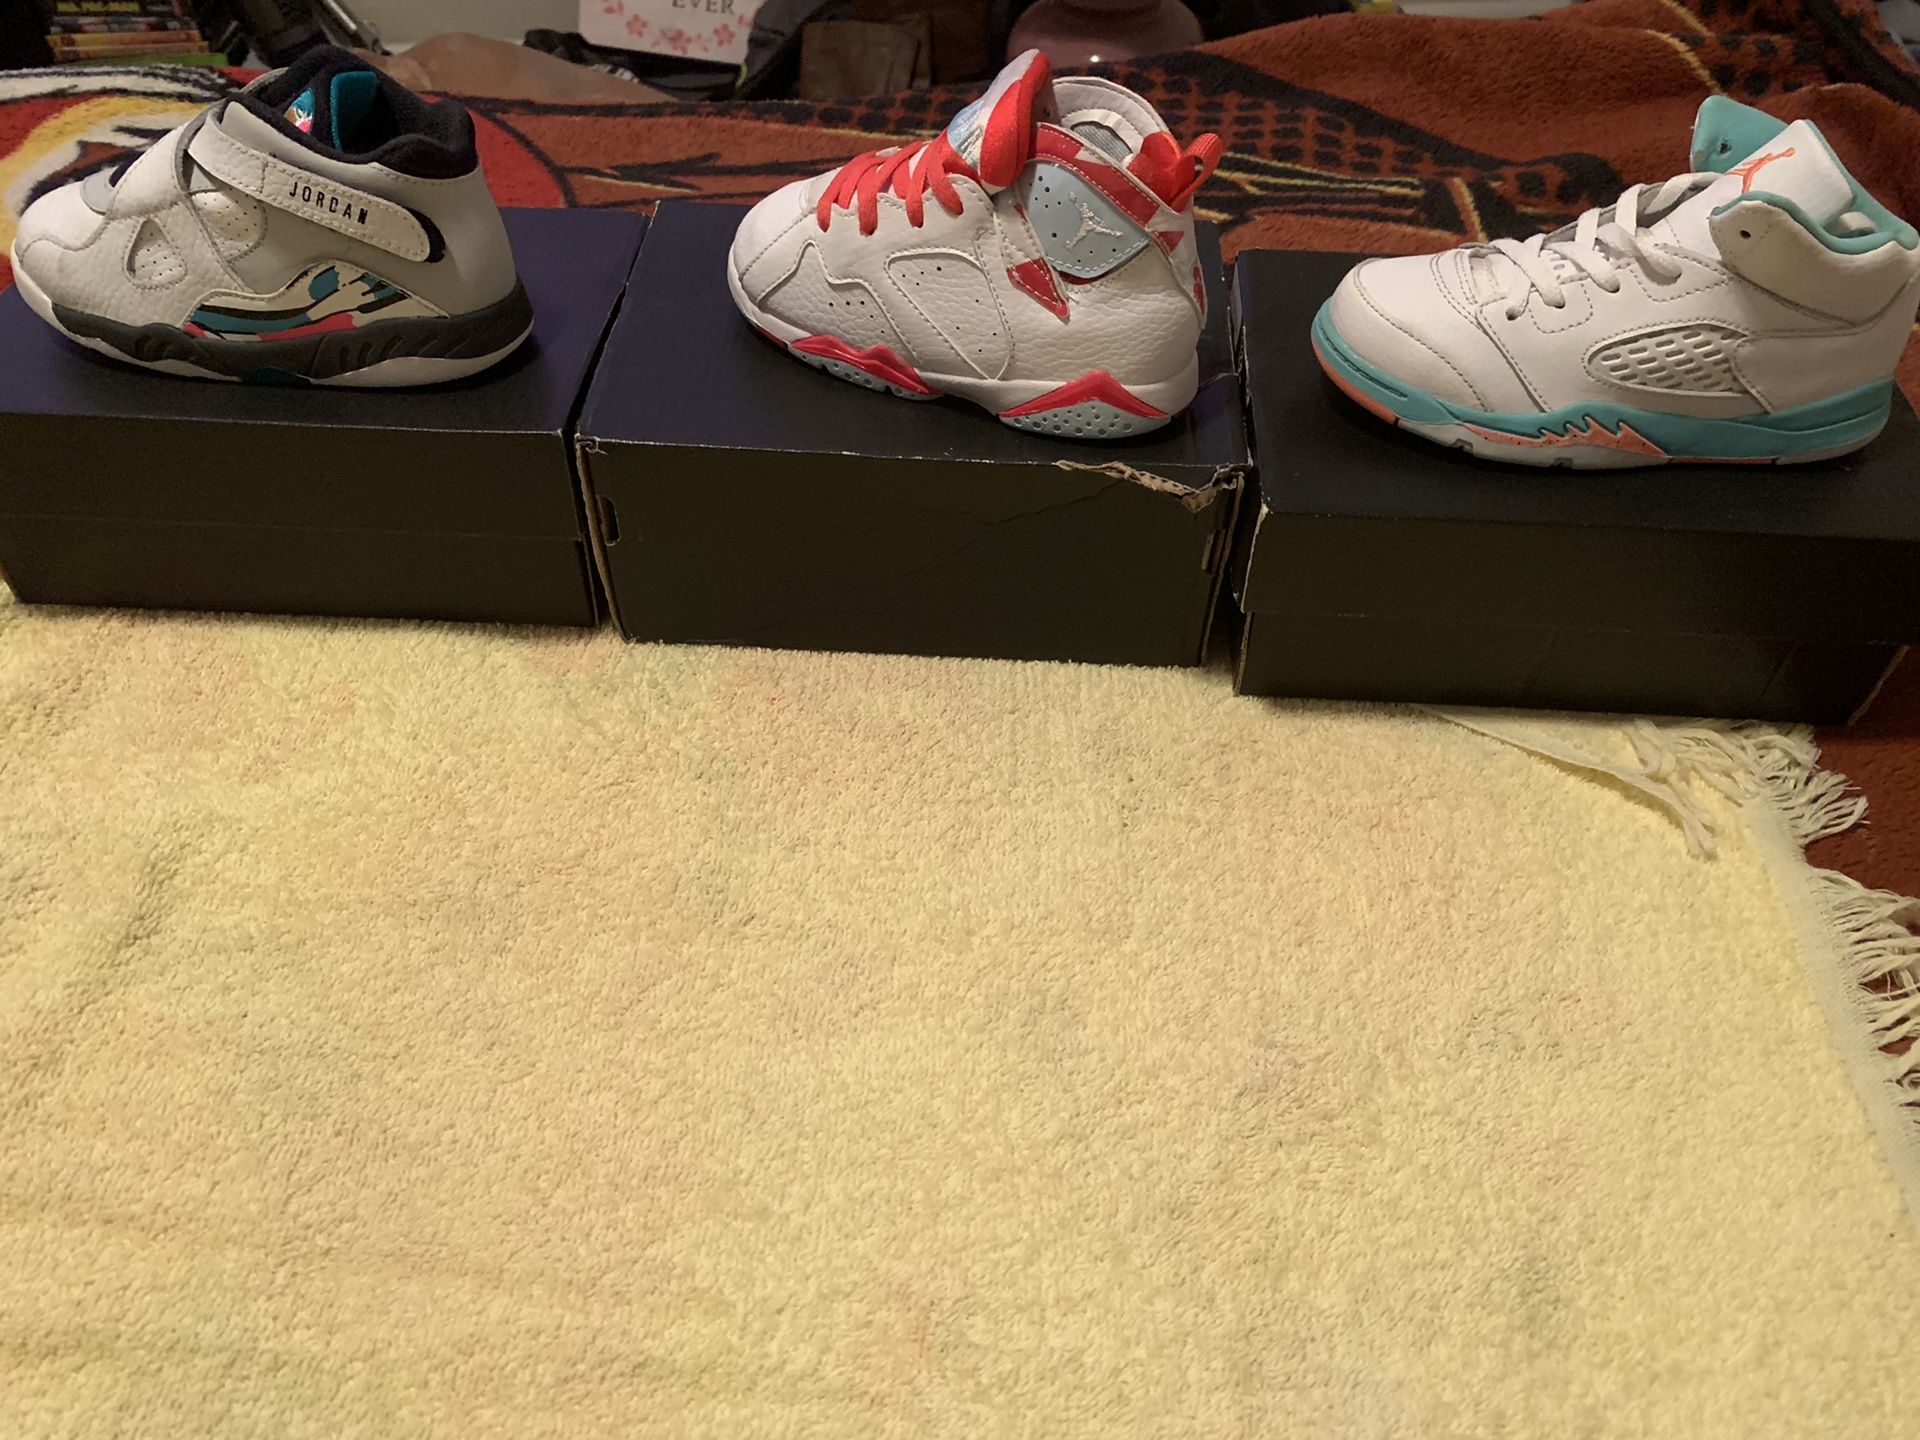 All size 9 $40 each ....all 3 pair for $100.. condition like New)